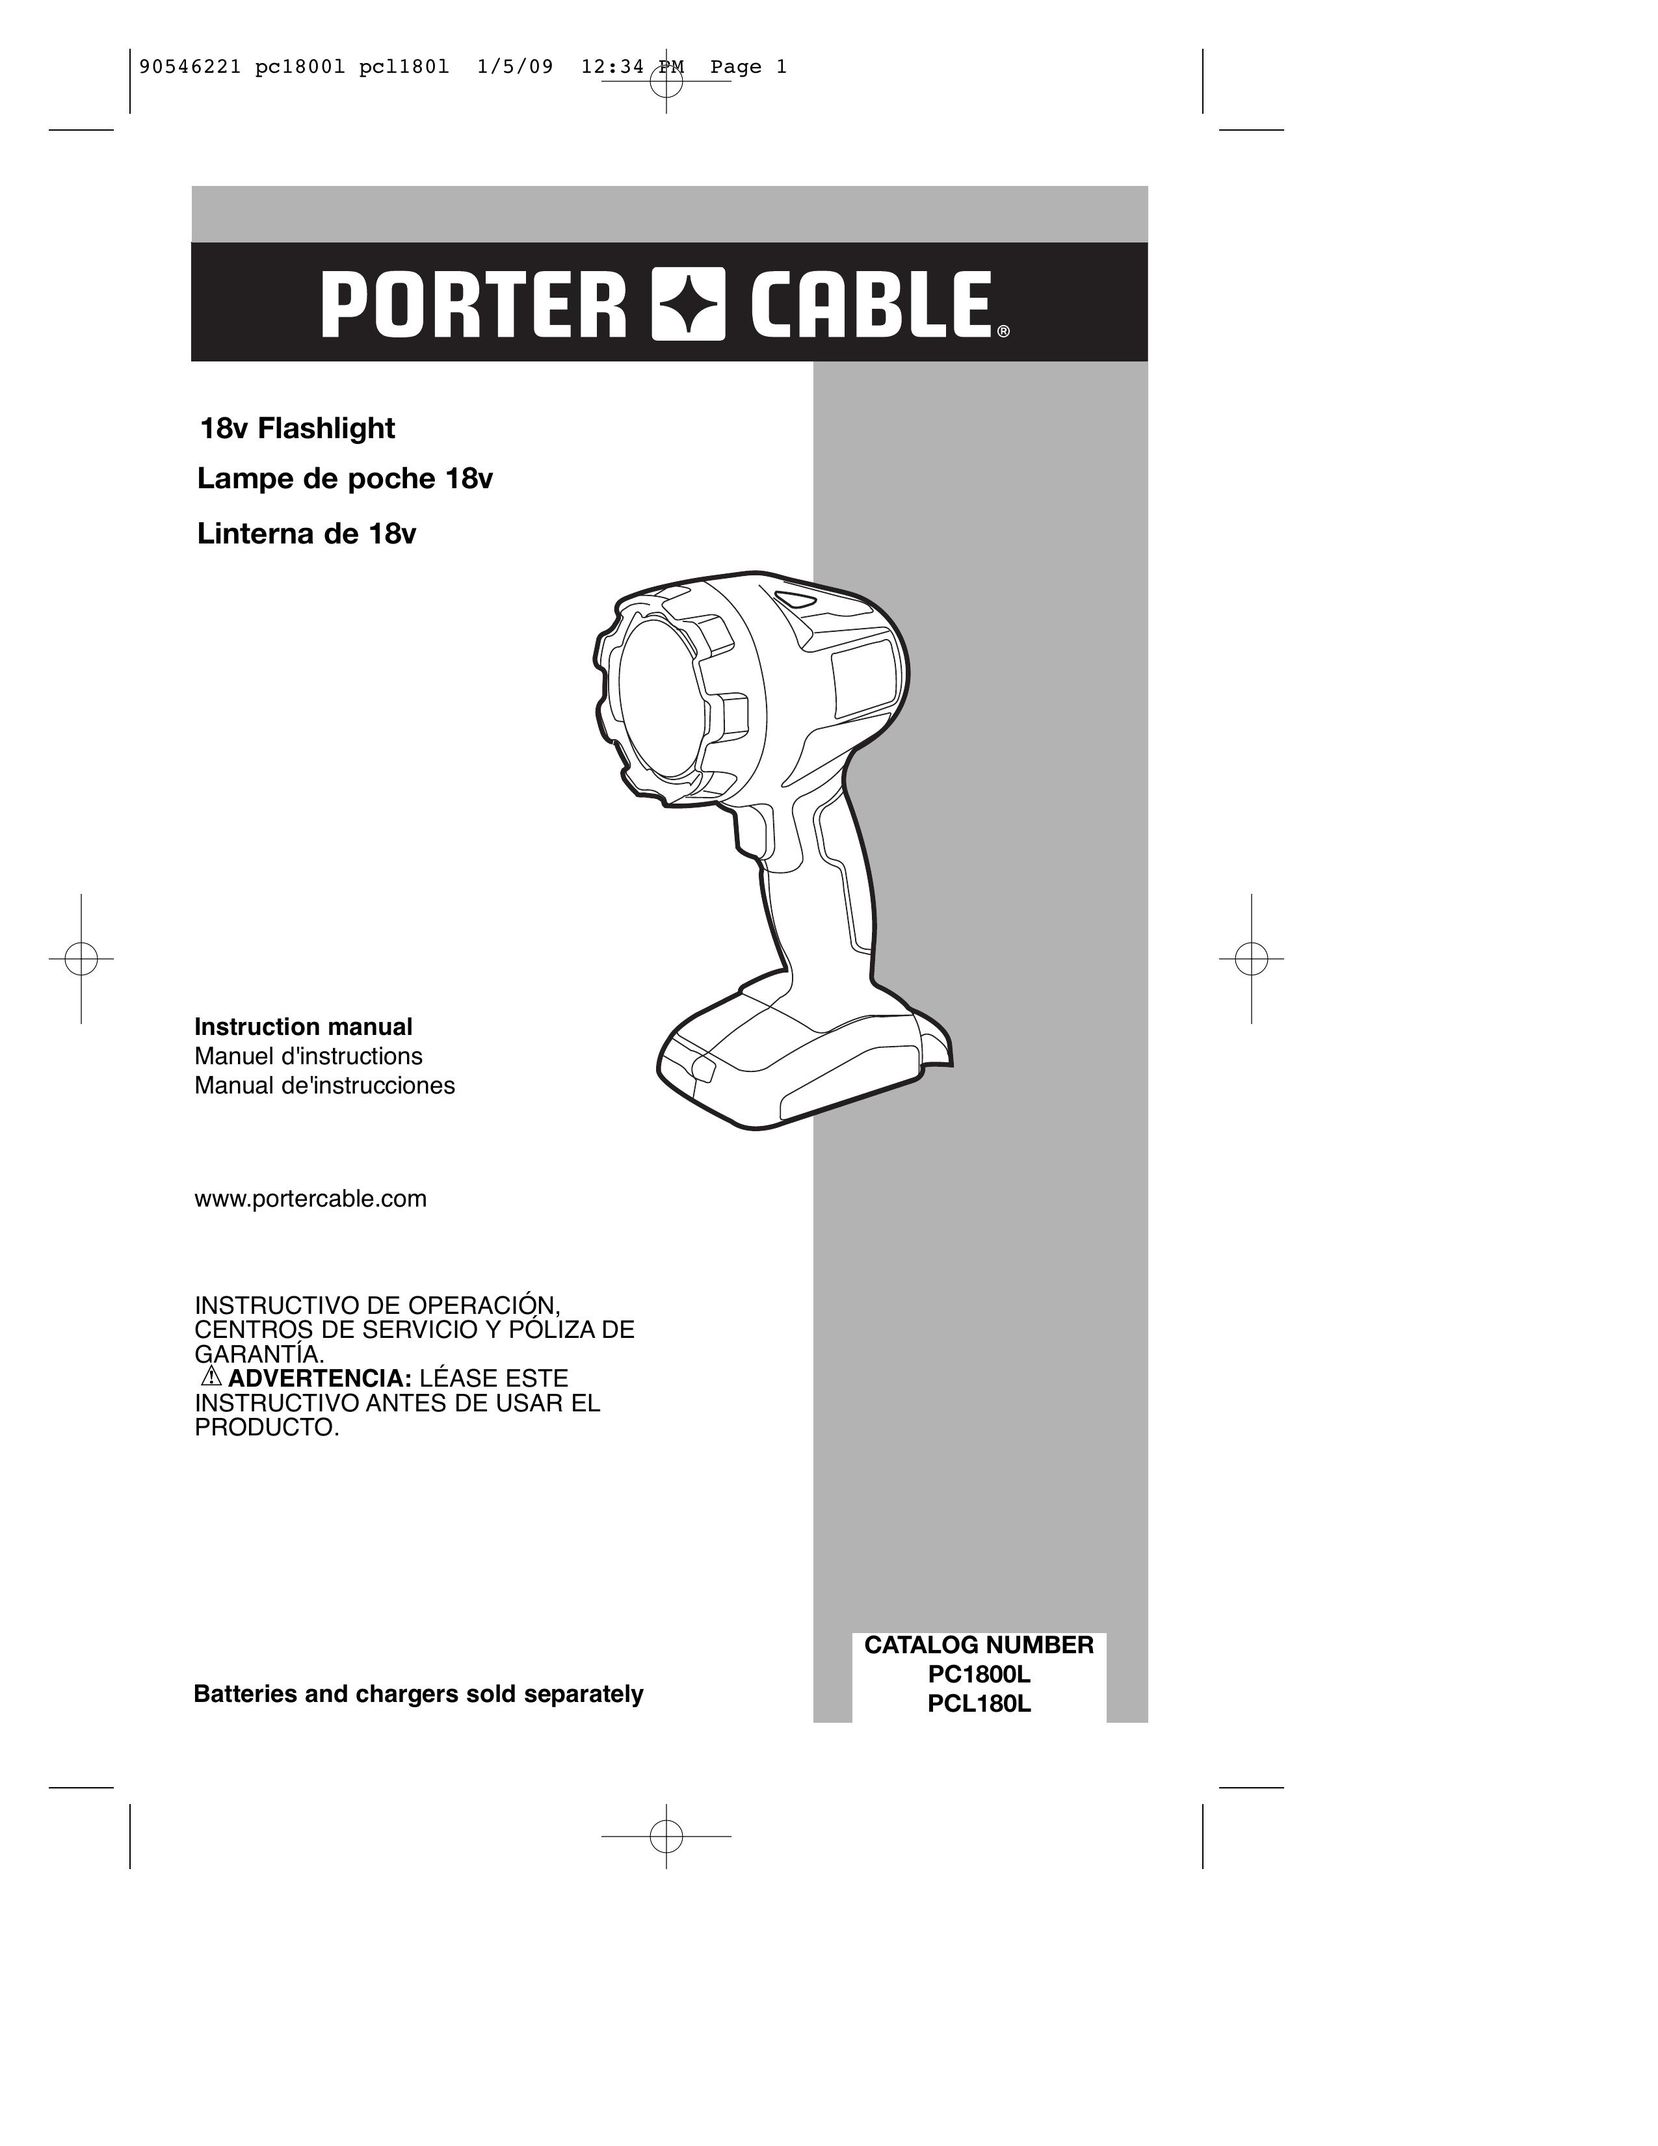 Porter-Cable PC1800L Home Safety Product User Manual